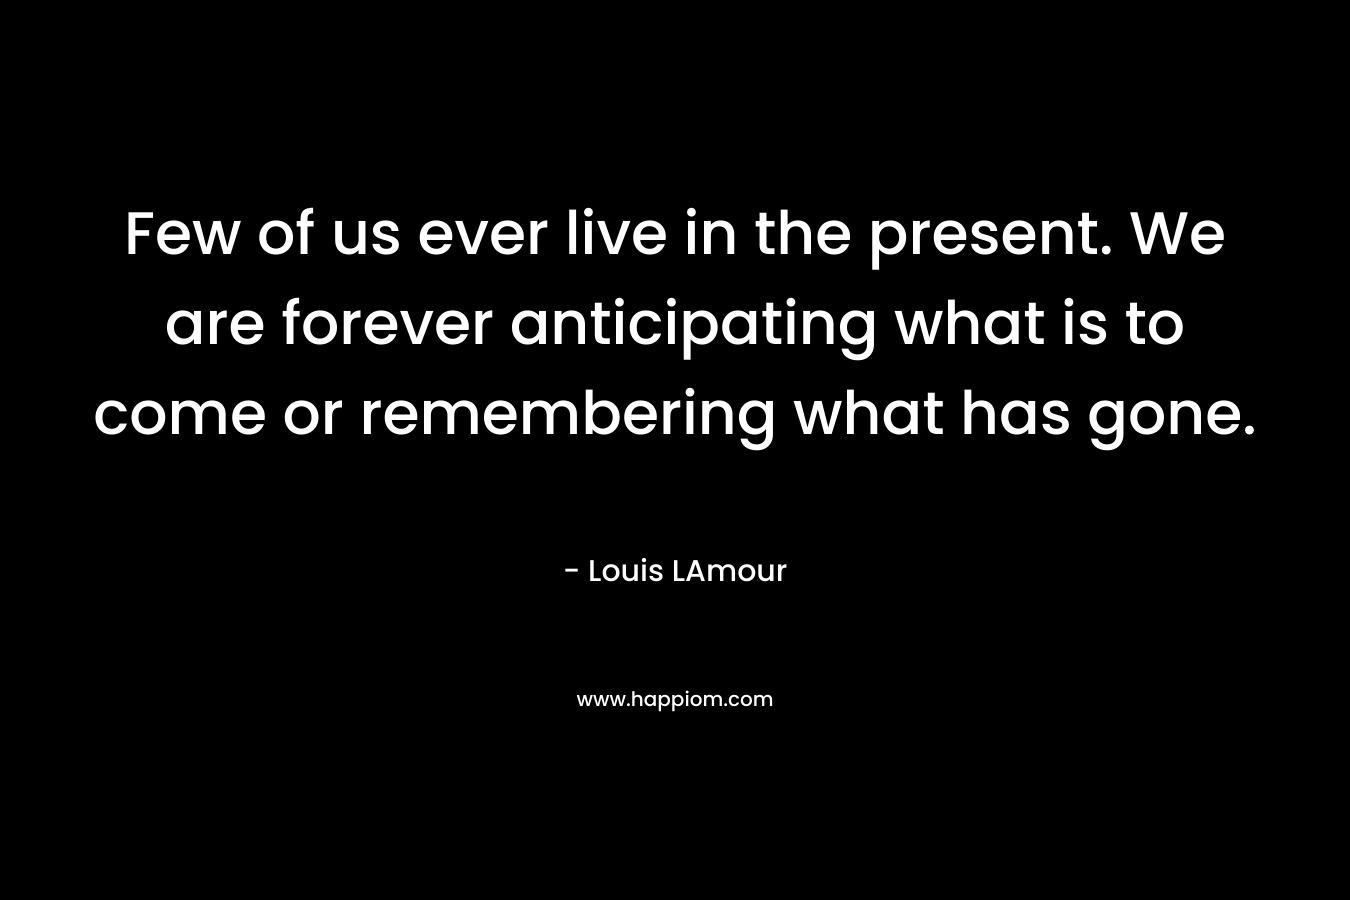 Few of us ever live in the present. We are forever anticipating what is to come or remembering what has gone.